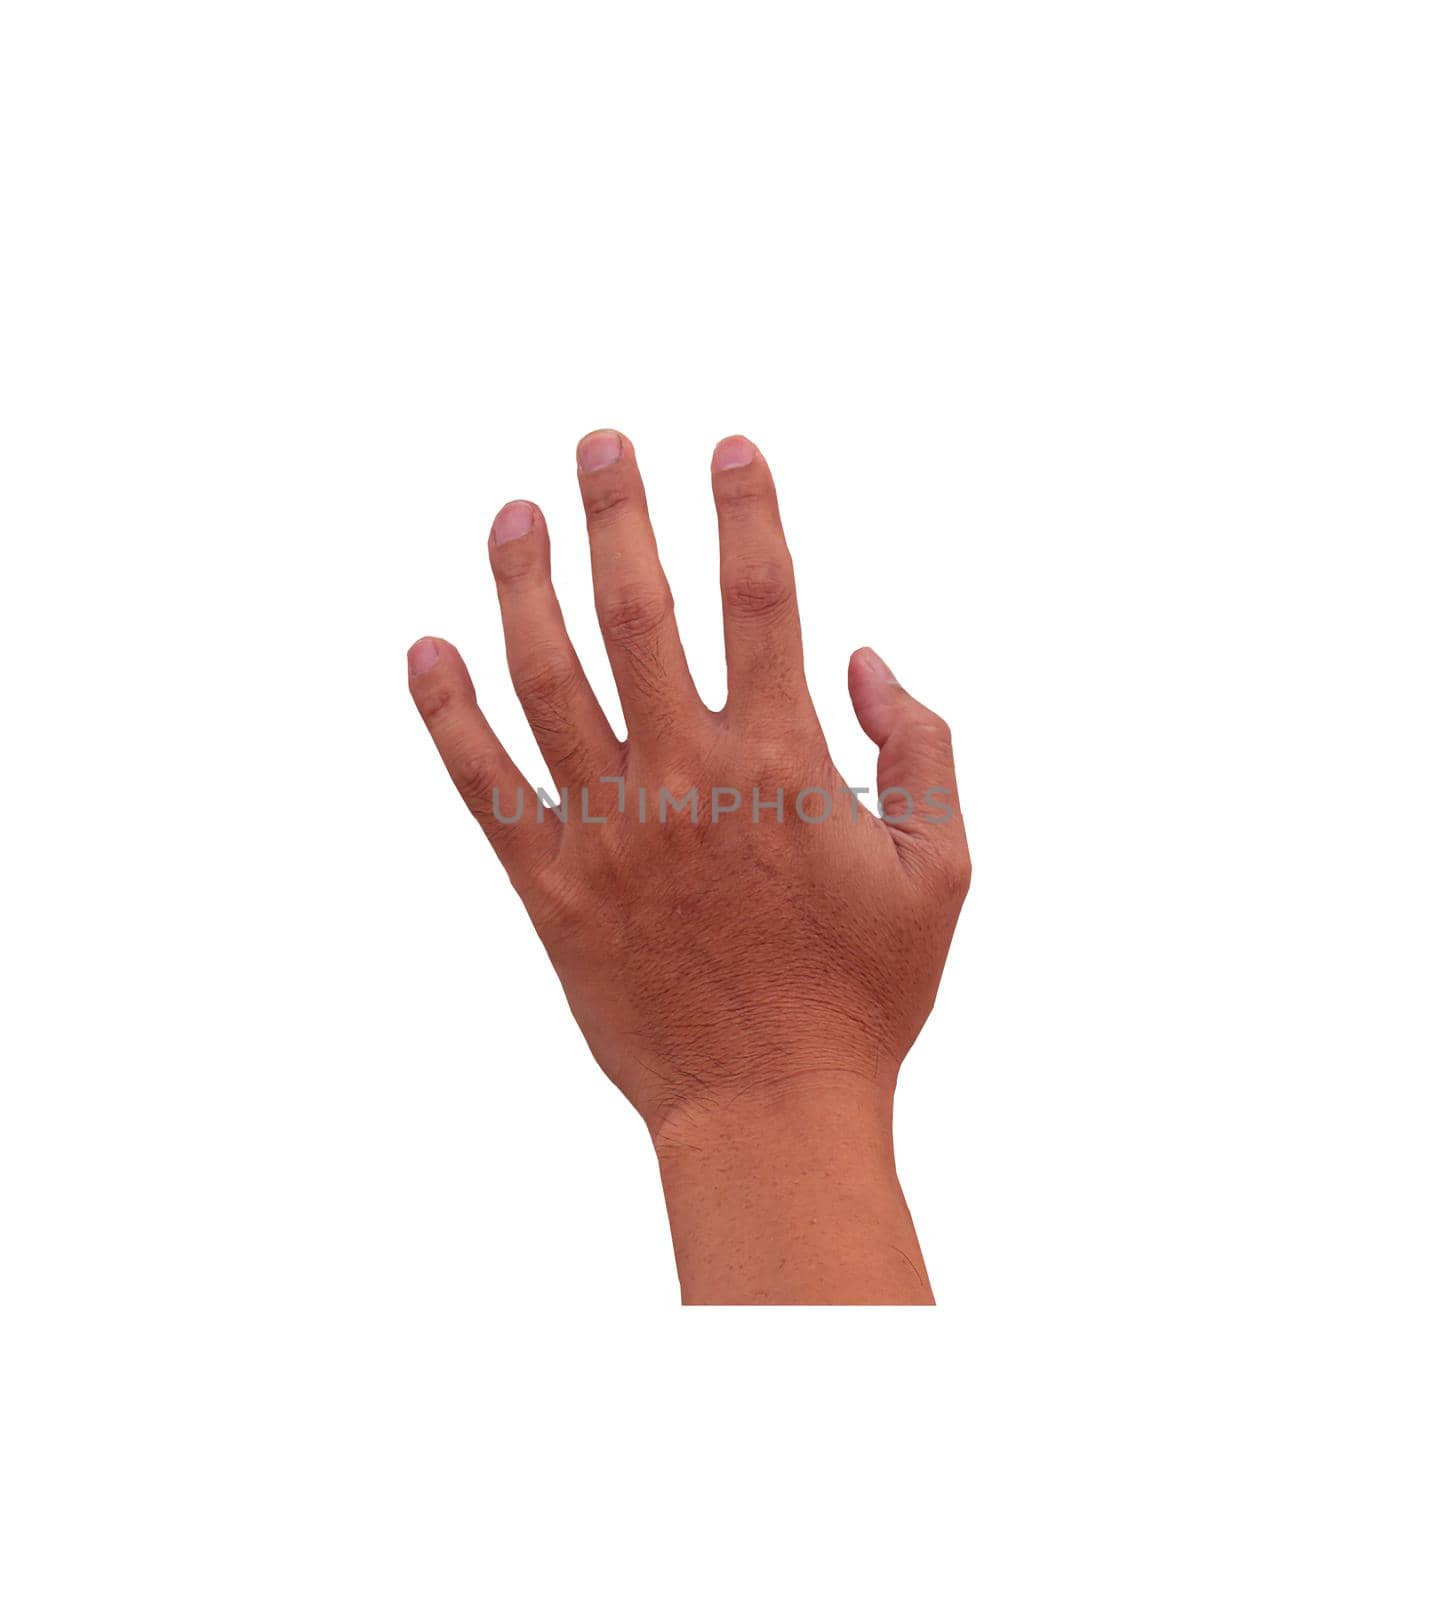 Man hand sign isolated on white background. Human body part represent abstract handcraft.